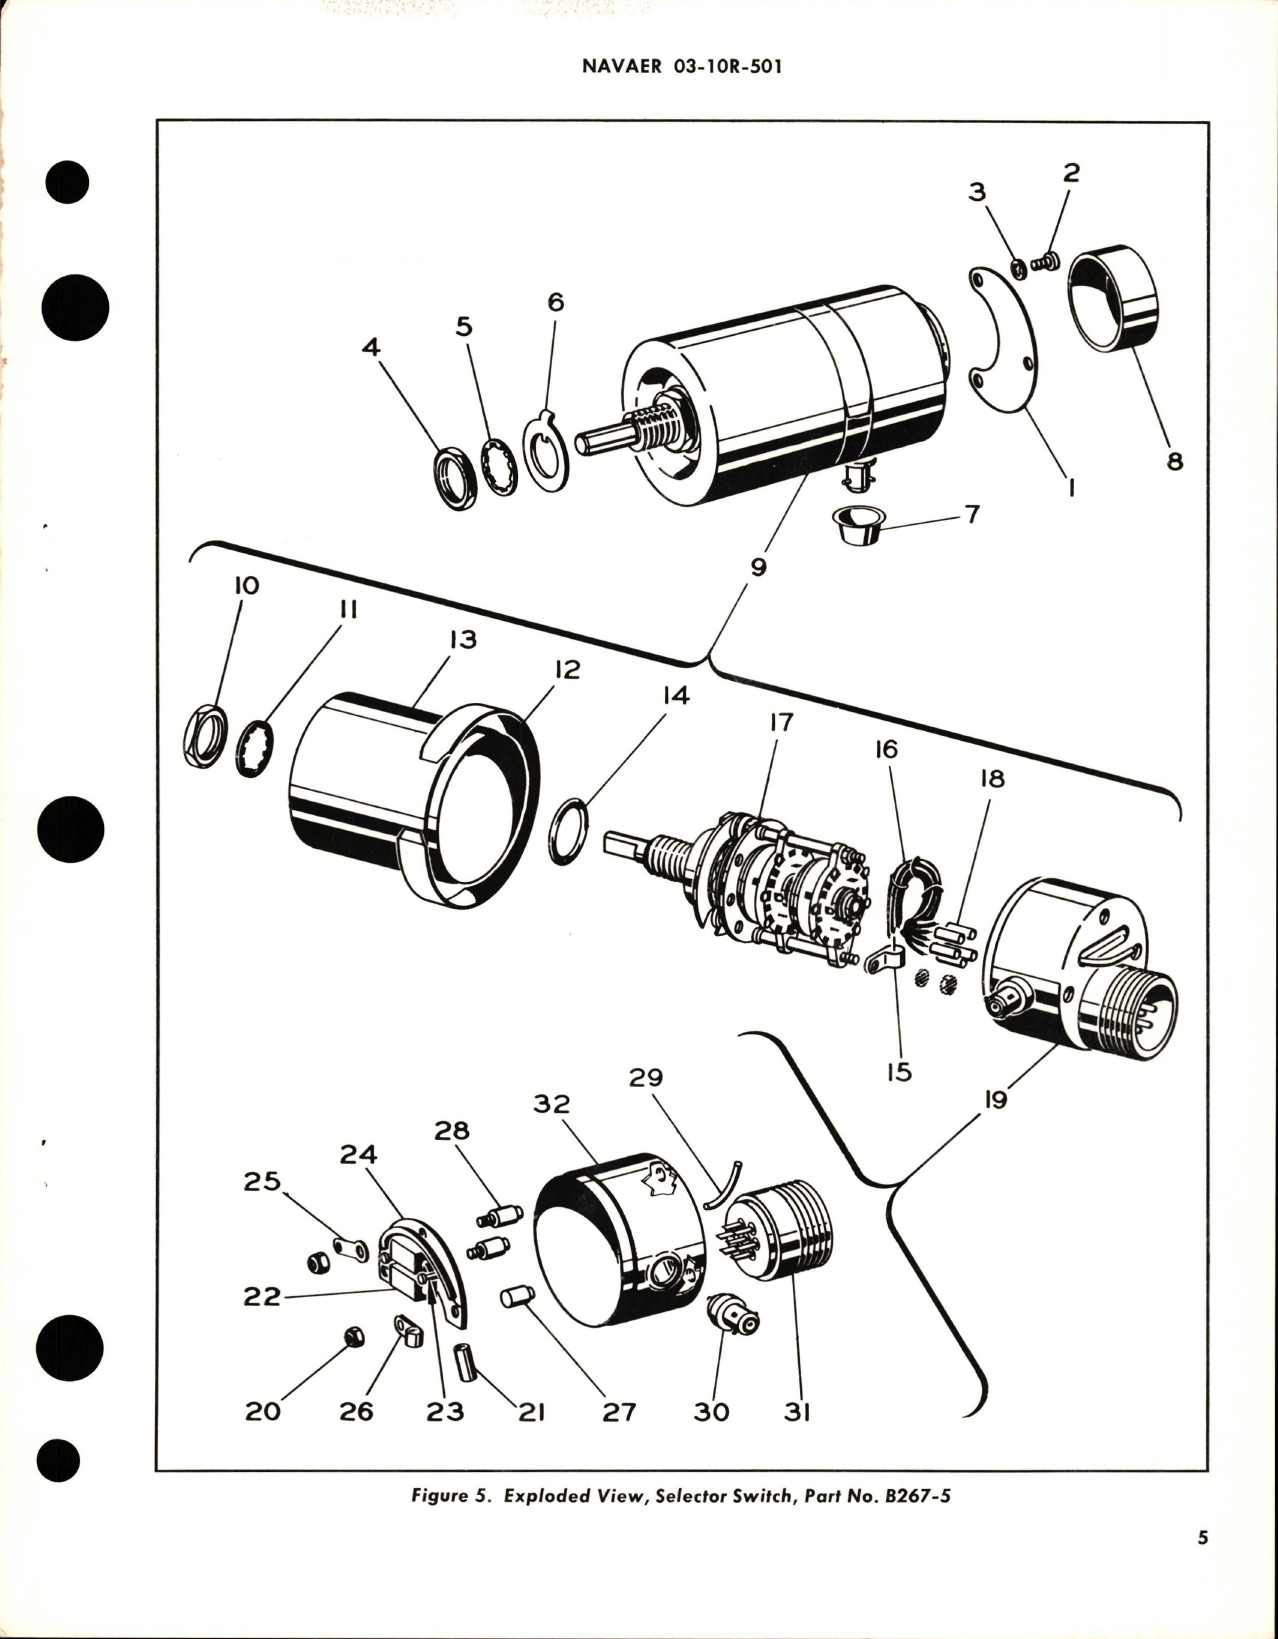 Sample page 5 from AirCorps Library document: Overhaul Instructions with Parts Breakdown for Selector Switch Assembly - B267-5